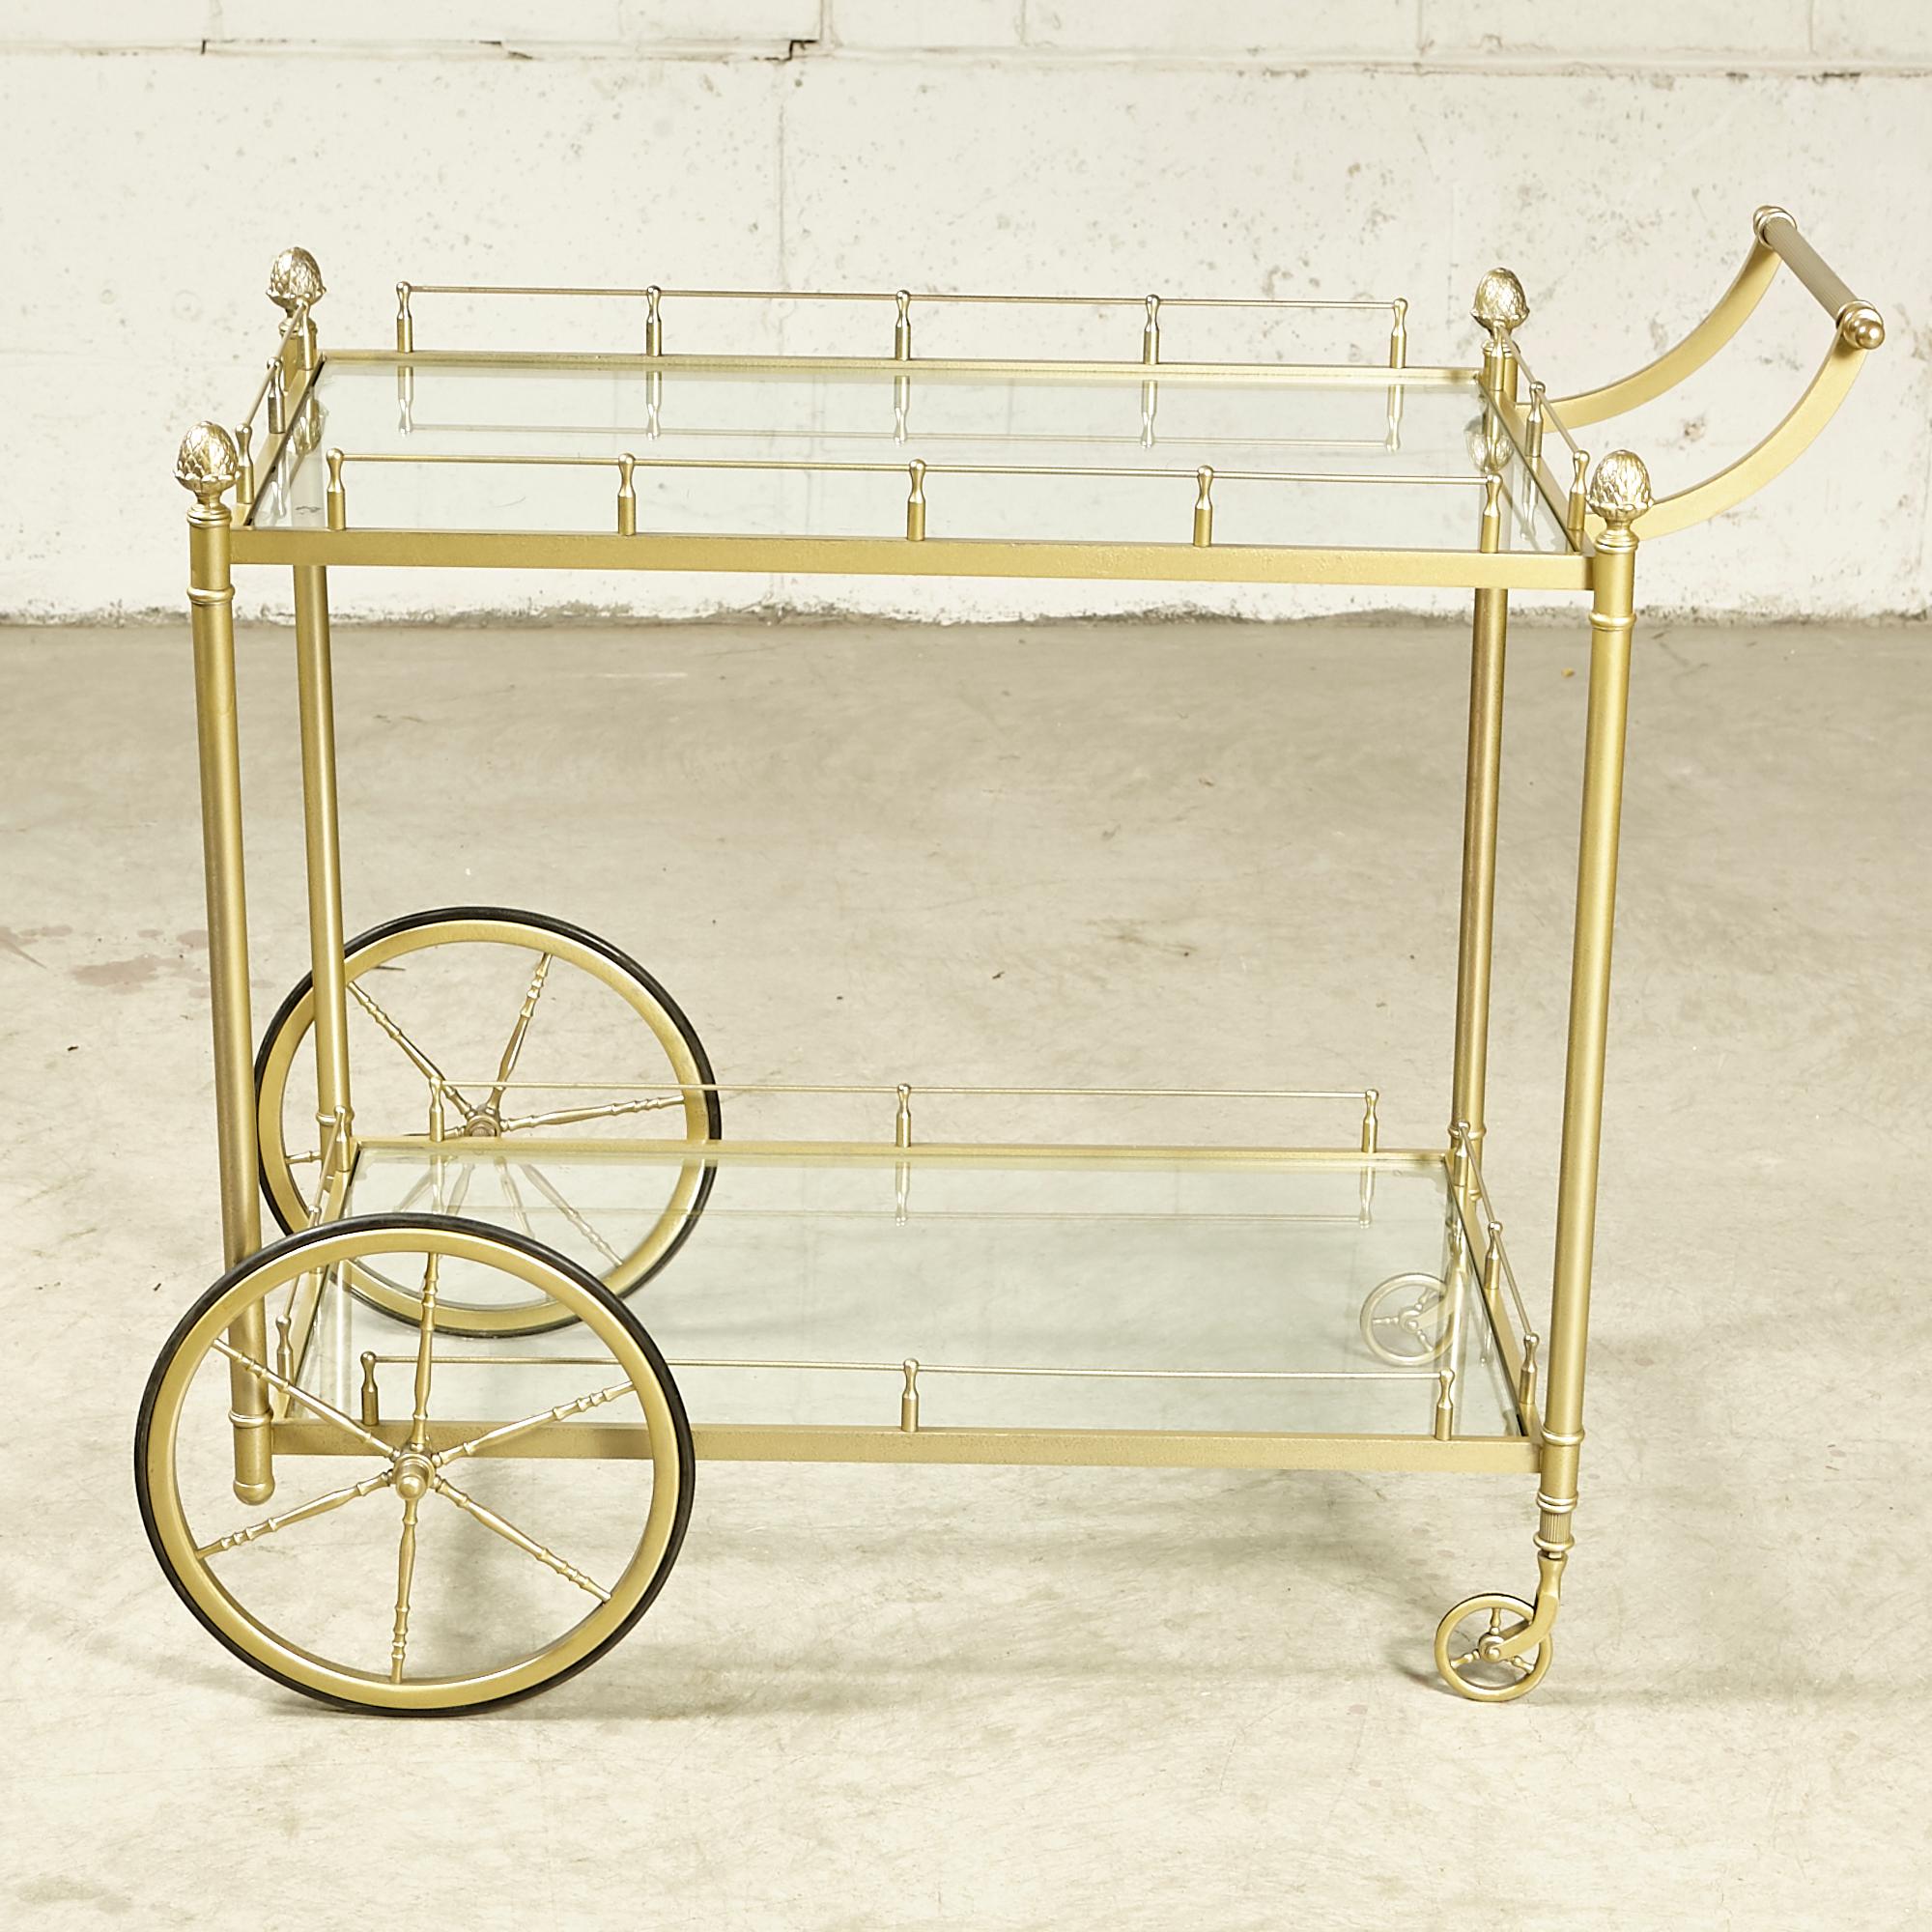 Vintage 1960s brass and glass rolling serving/bar cart with pineapple accents. The cart is in newly refinished condition. No maker's mark.